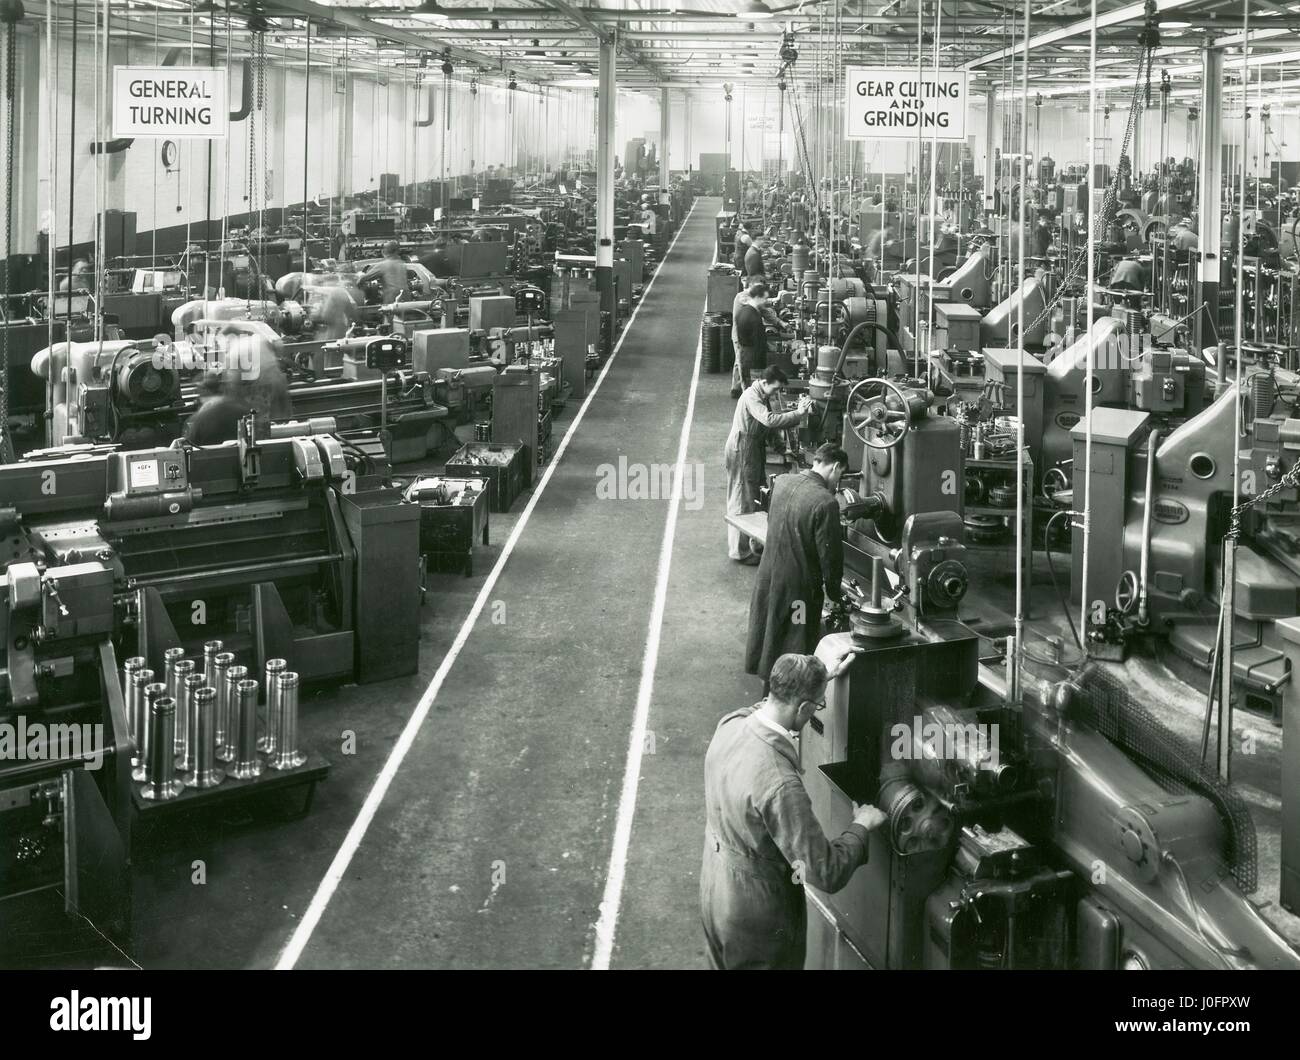 Liverpool works, general turning line on the left, gear cutting and grinding on the right Stock Photo